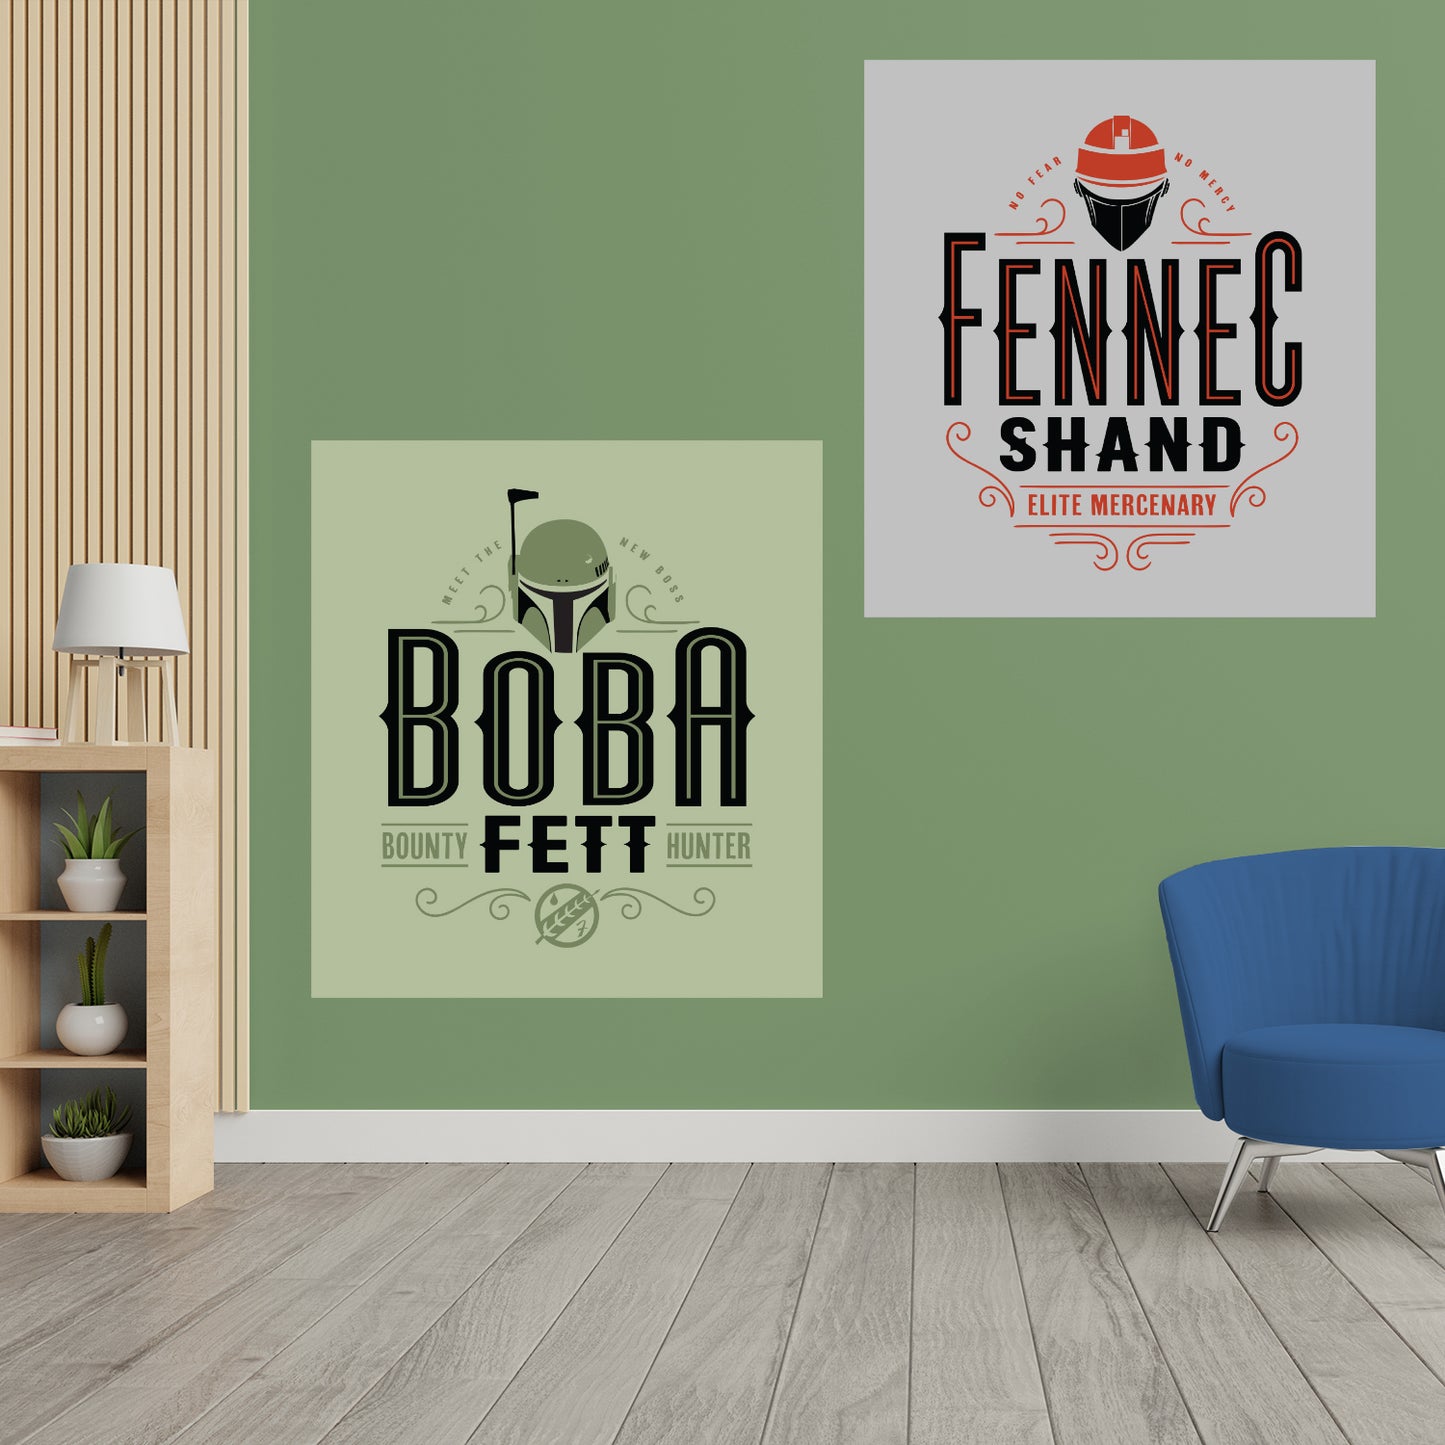 Book of Boba Fett: Boba Fett & Fennec Shand Typographic Badge Poster Collection        - Officially Licensed Star Wars Removable     Adhesive Decal